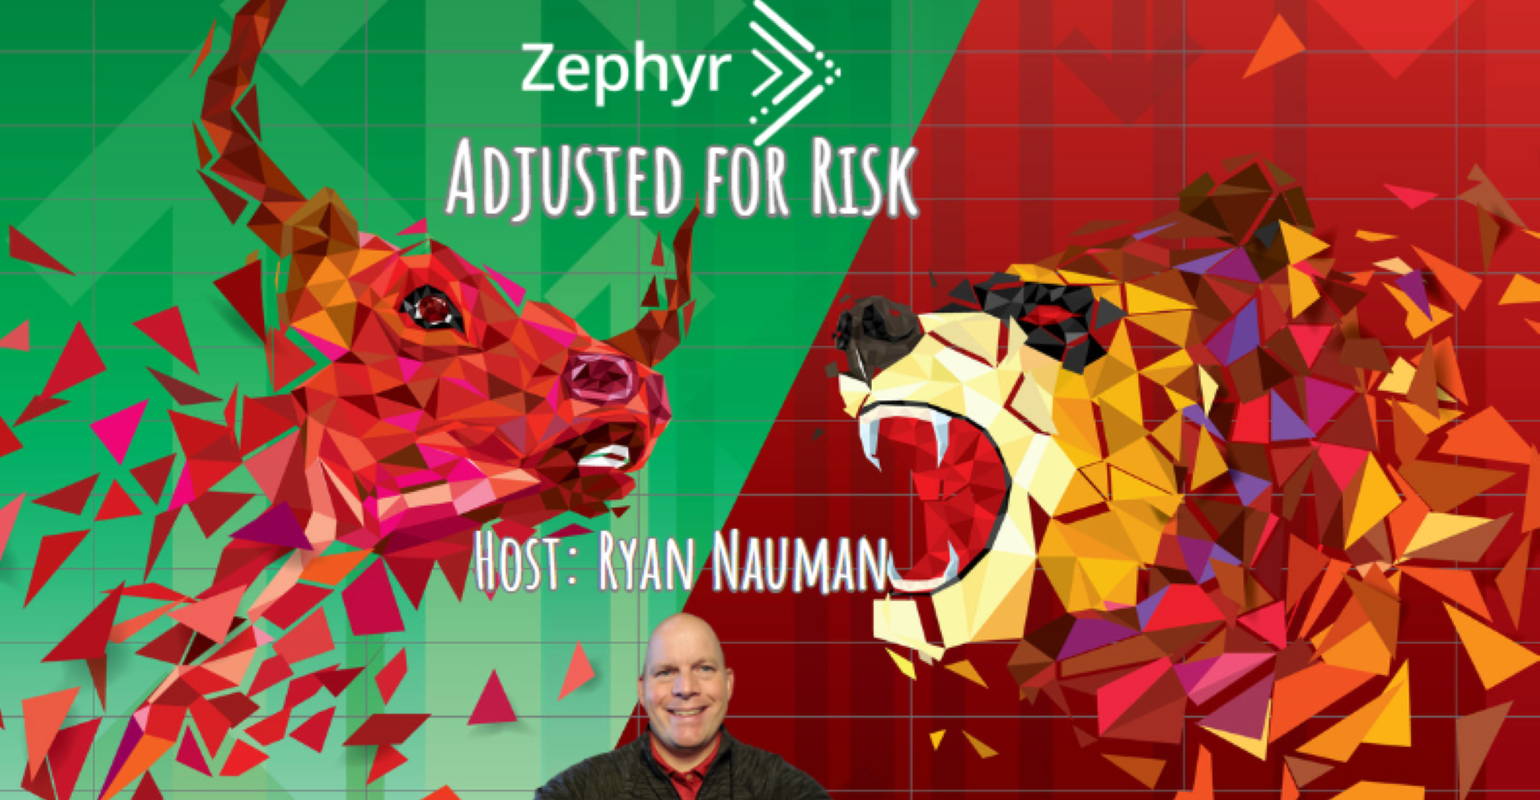 Adjusted for Risk: Investment Trends Gert van der Geer Is Following [Video]